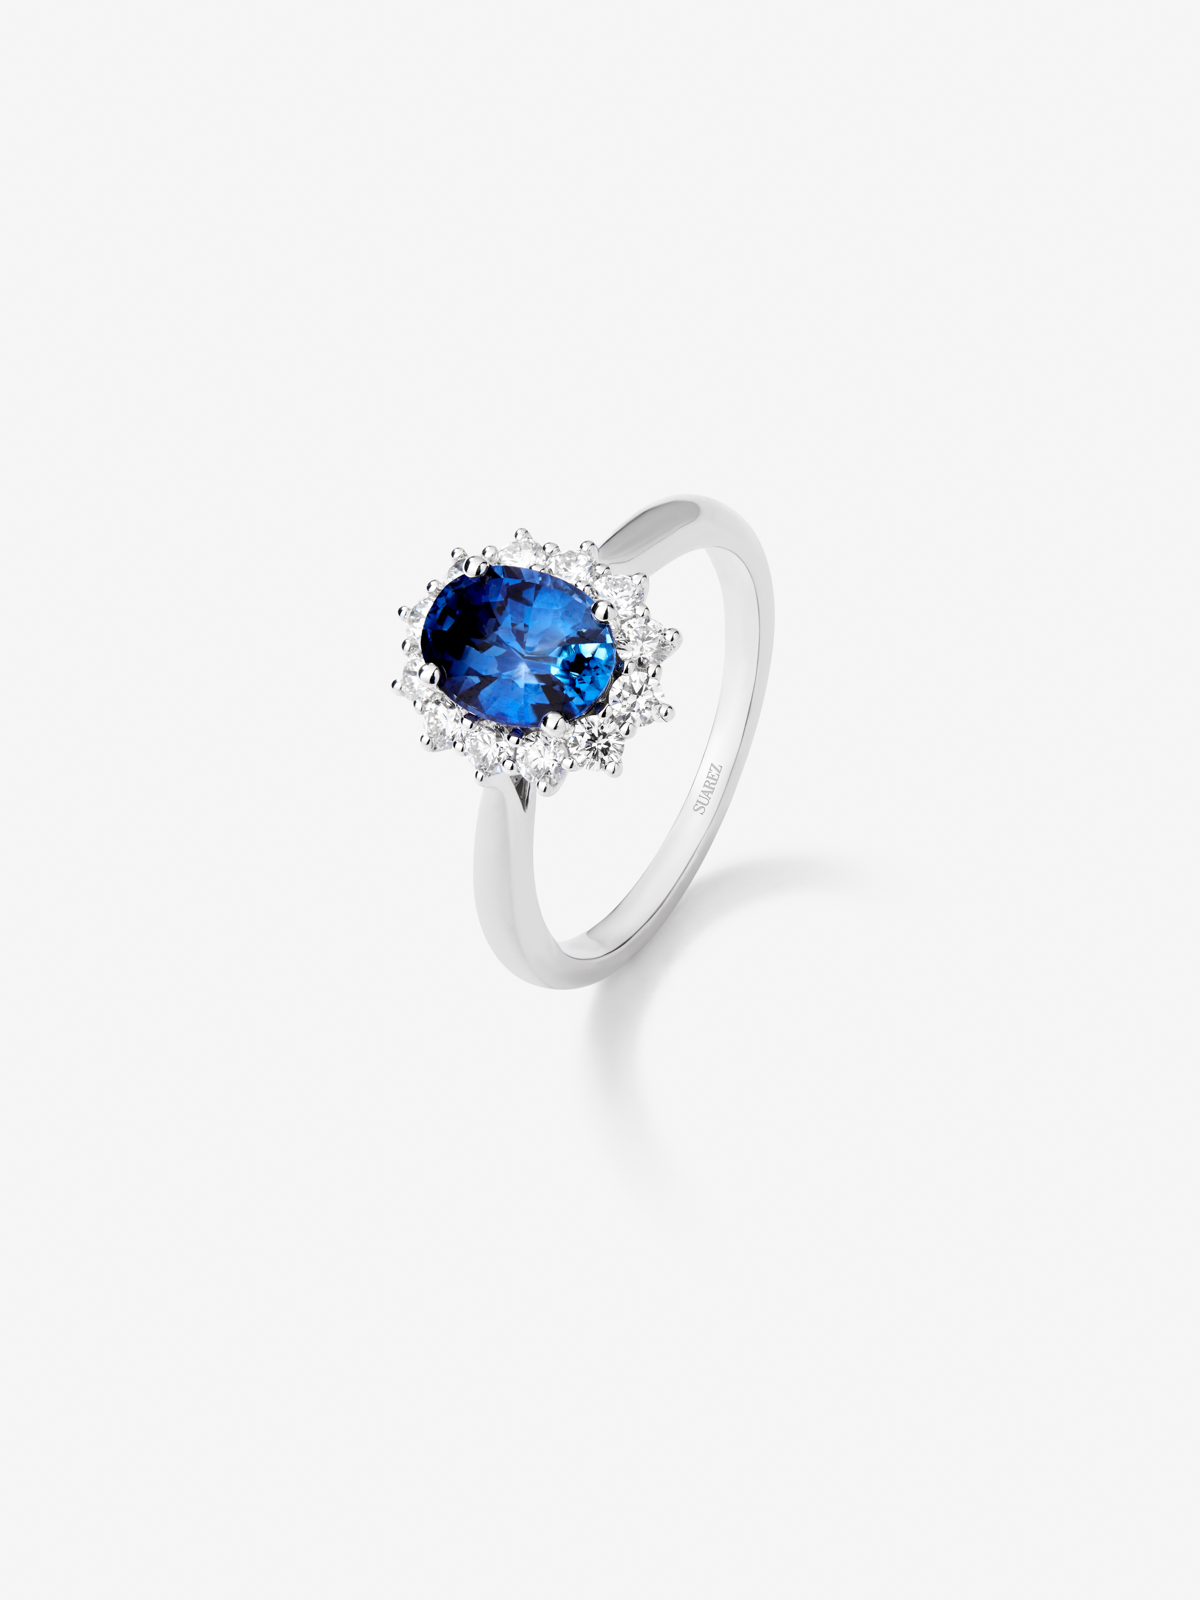 18K White Gold Ring with Cornflower Blue Zafiro in 2.67 cts oval size